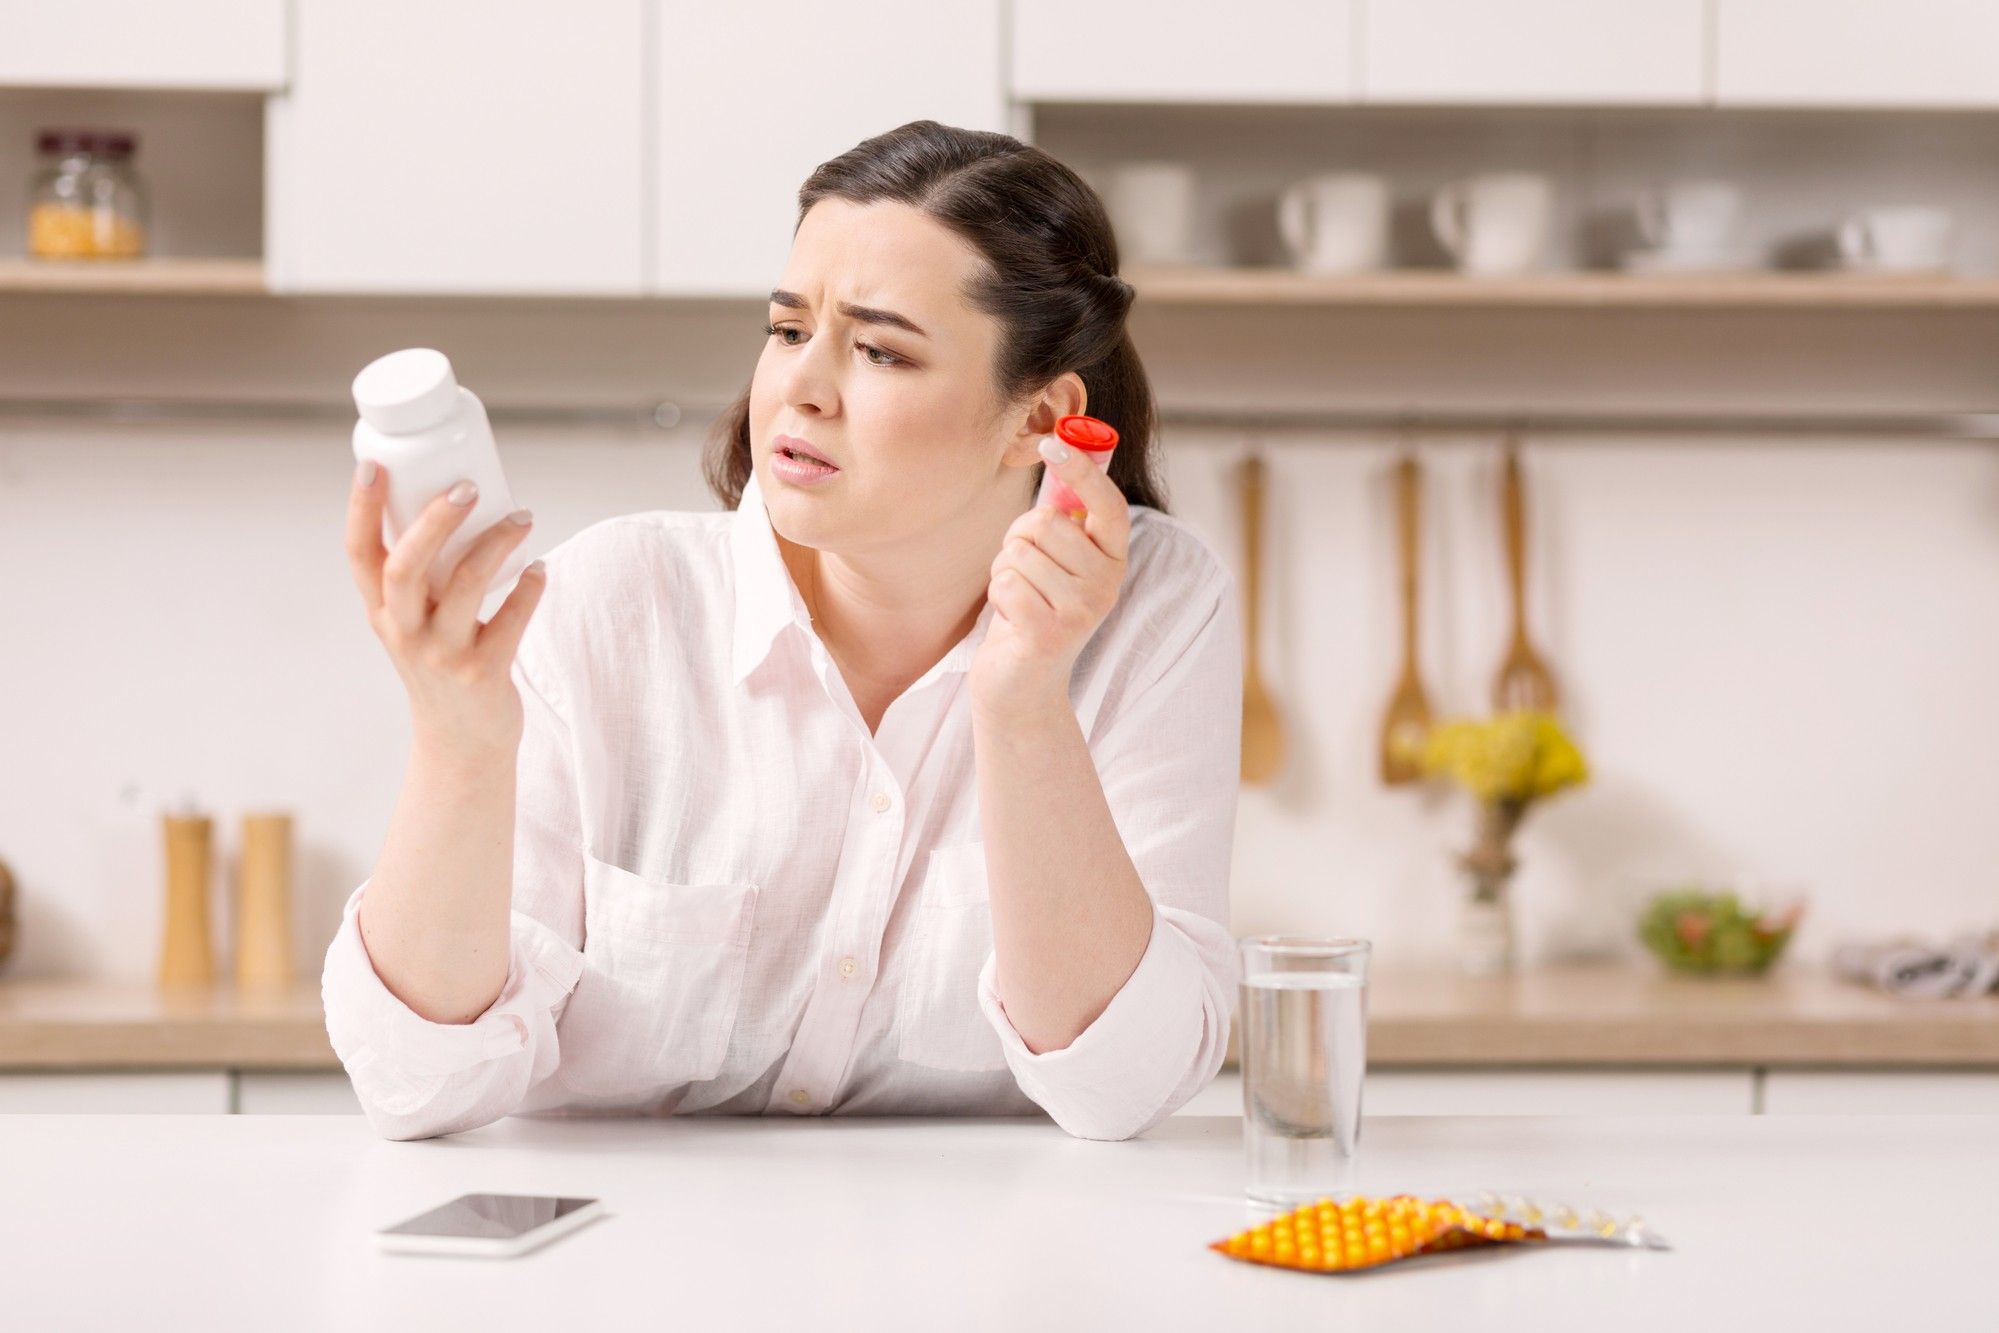 woman looking at Belviq weight loss medication bottle